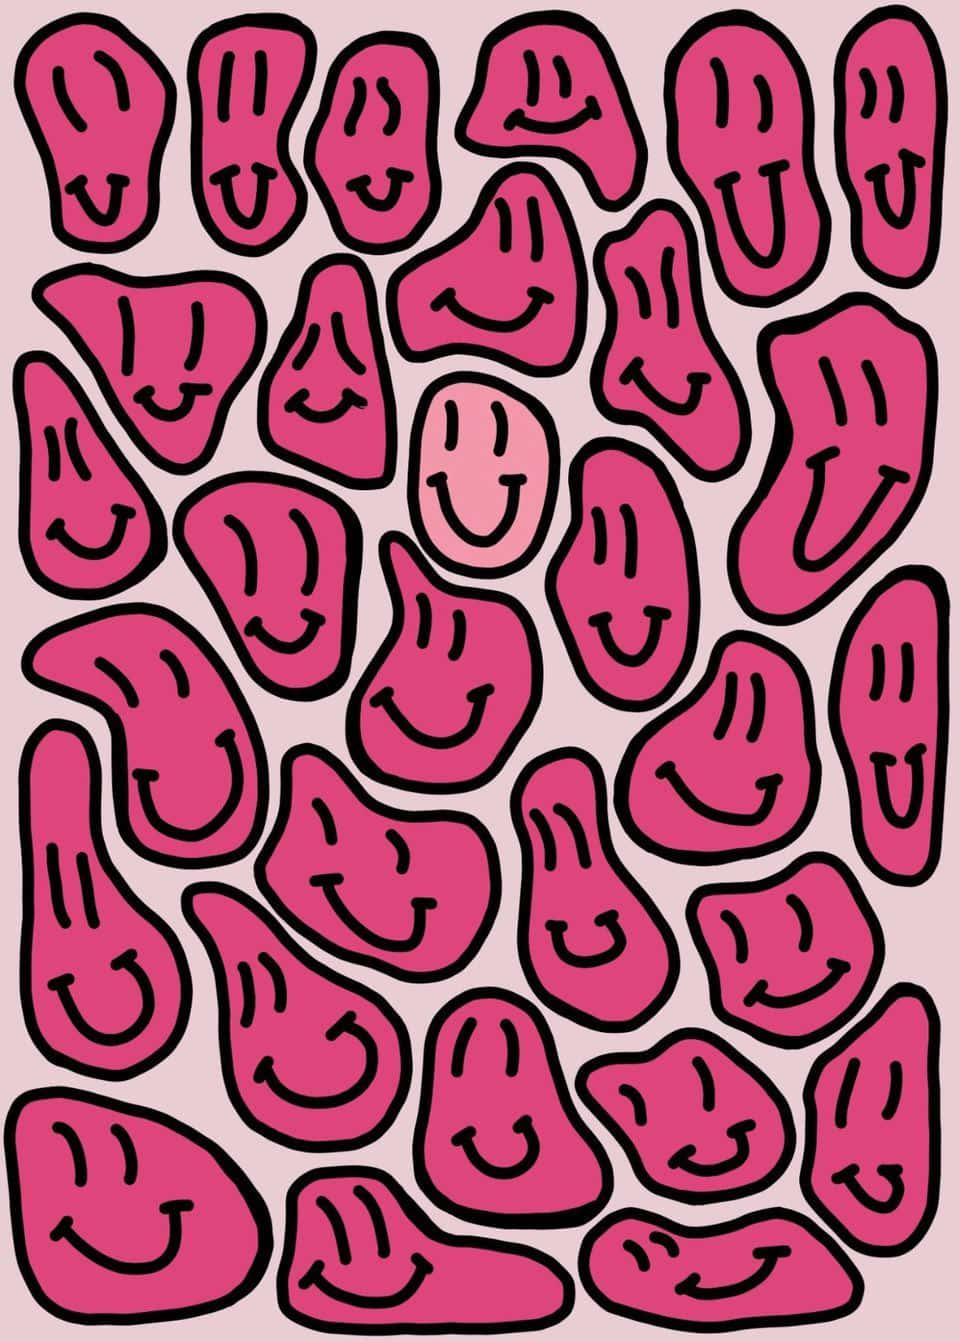 A Crisp Representation Of Preppy Style - Adorable Smiley Face Wallpaper Ready To Light Up Every Day